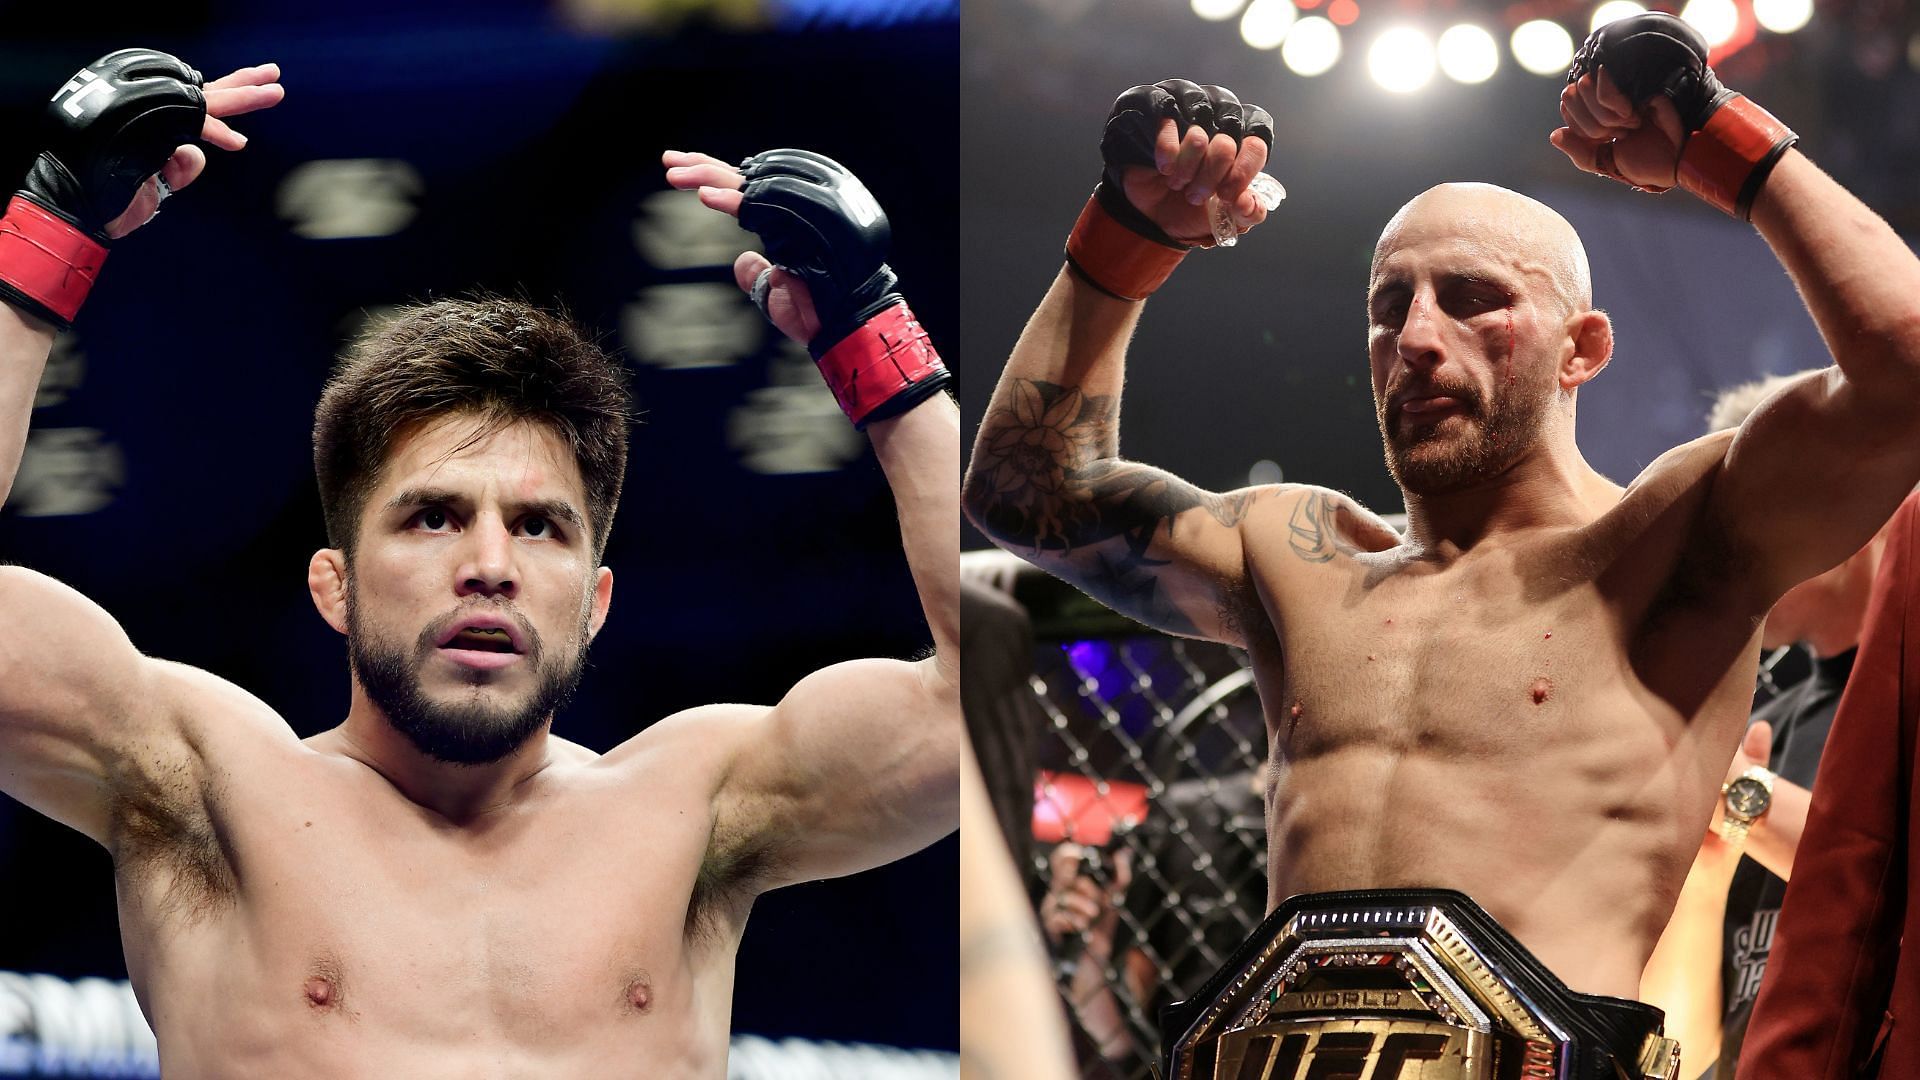 Cejudo (L) vs Volkanovski (R) will be the biggest event in UFC history according to the former flyweight champion